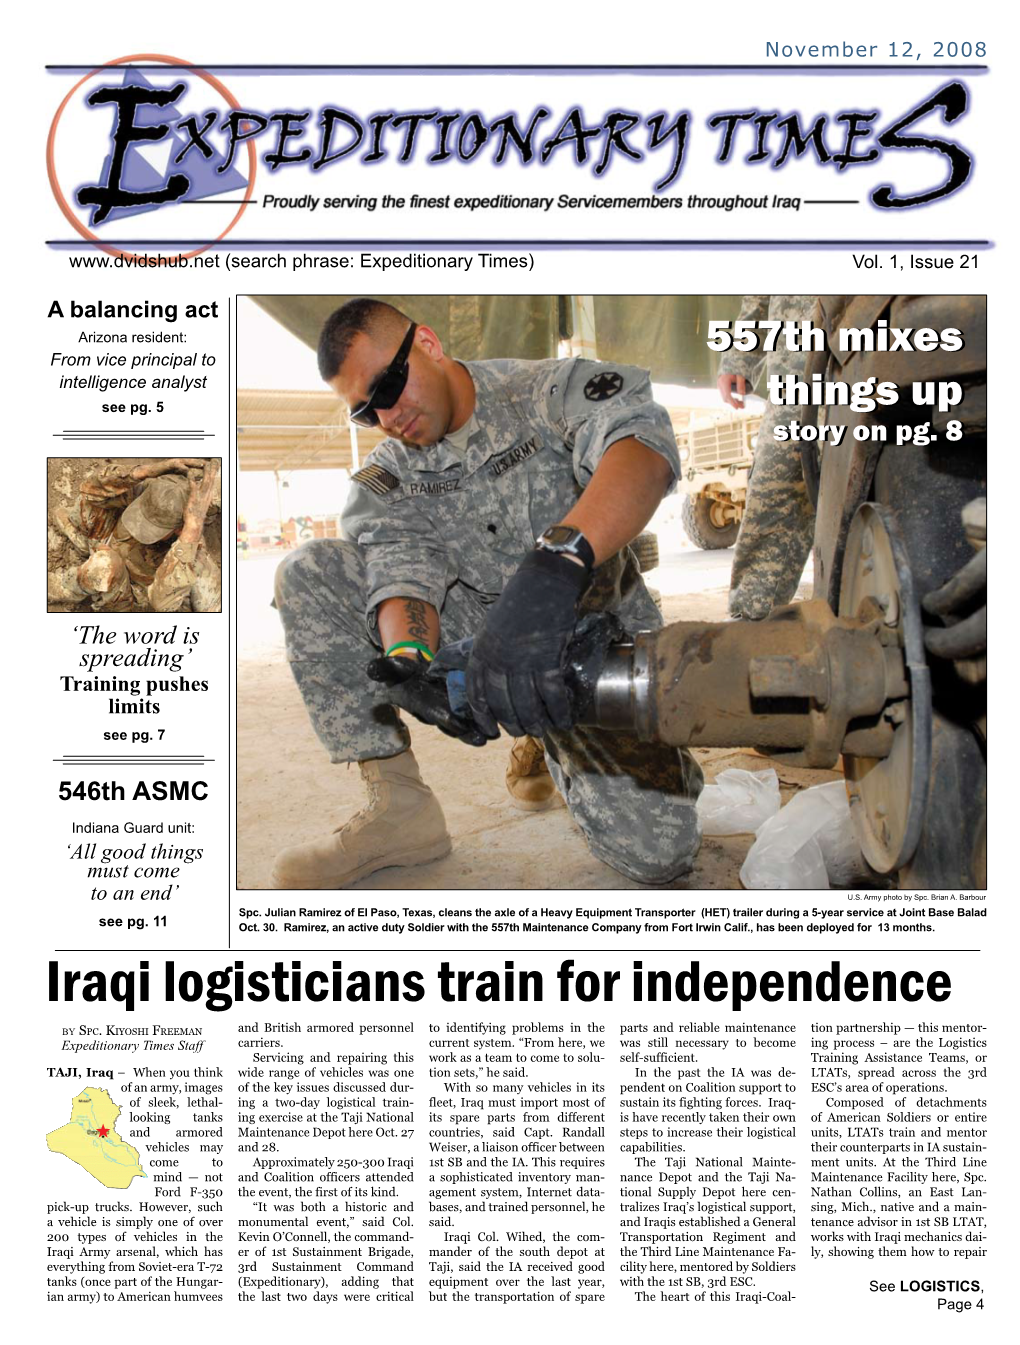 Iraqi Logisticians Train for Independence by Spc